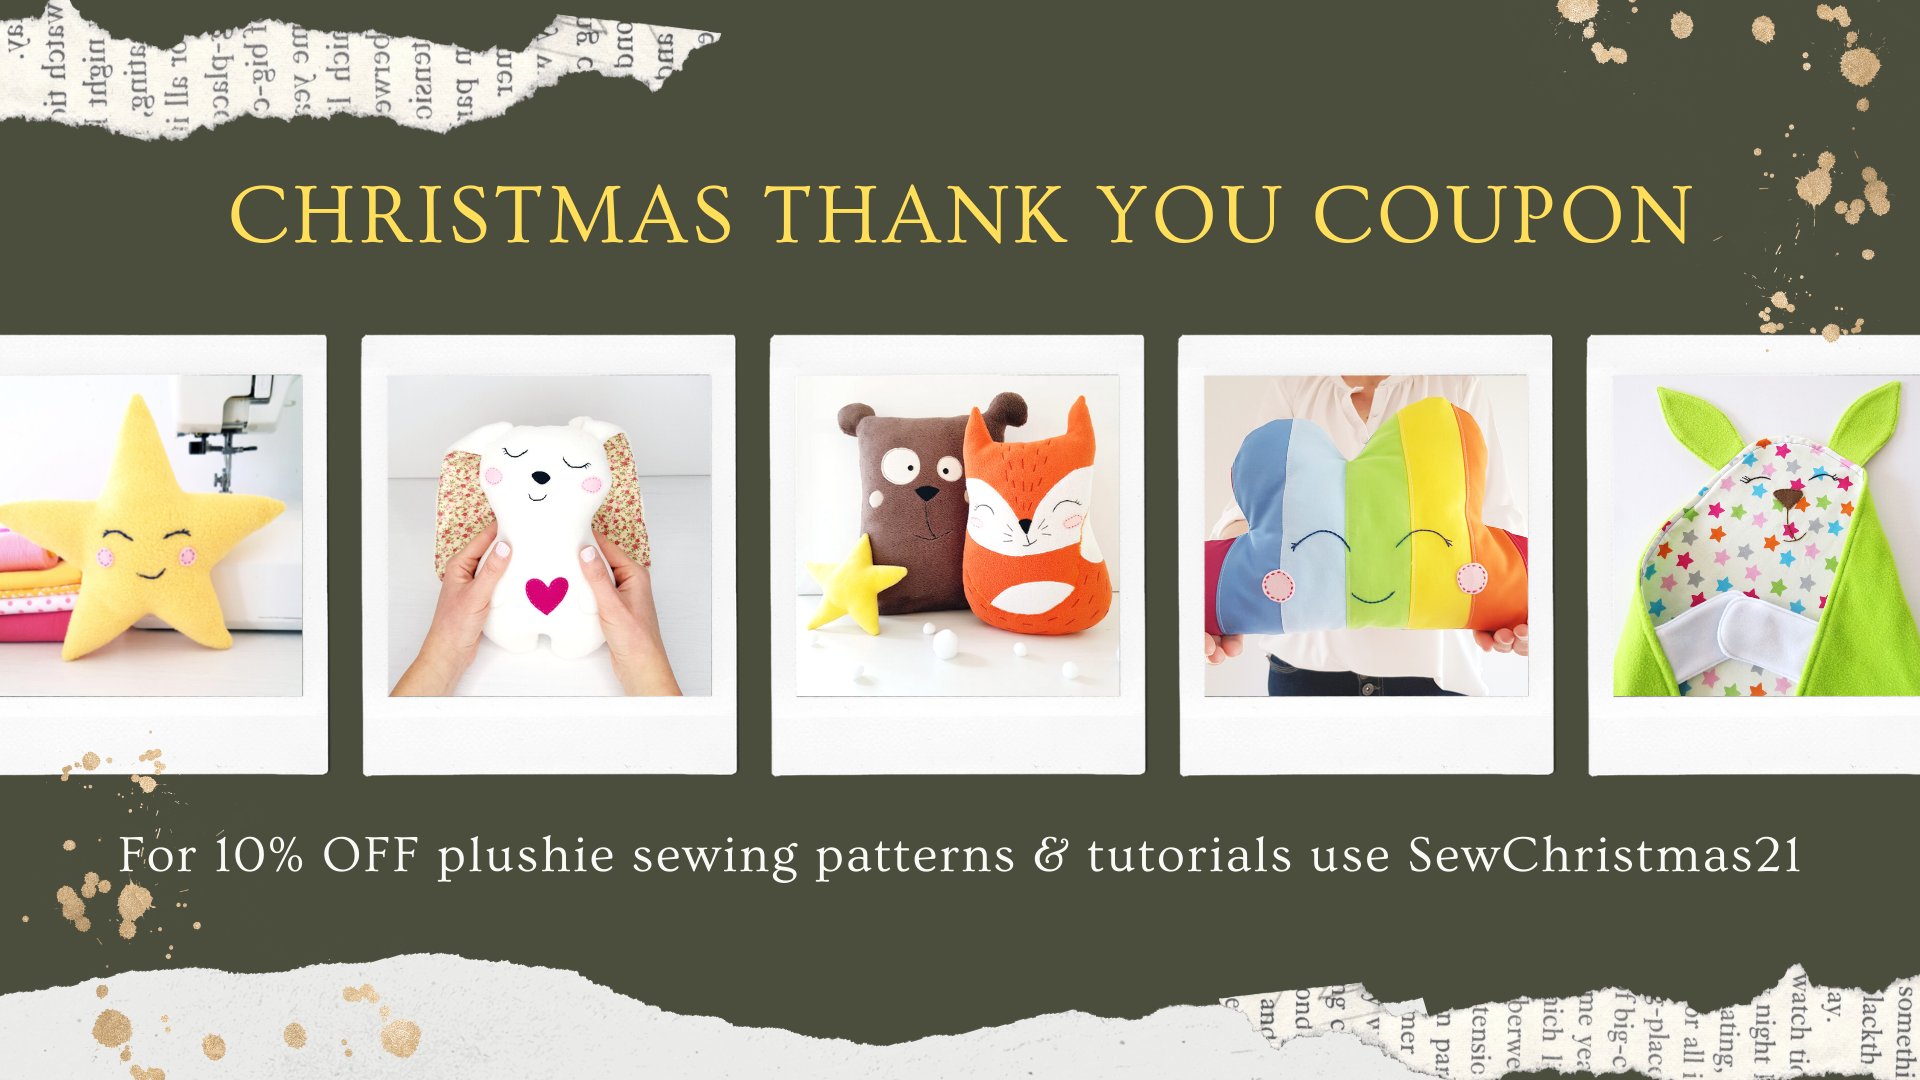 SewToy-Christmas 10% off coupon 2021 for easy stuffed toy sewing patterns and tutorials